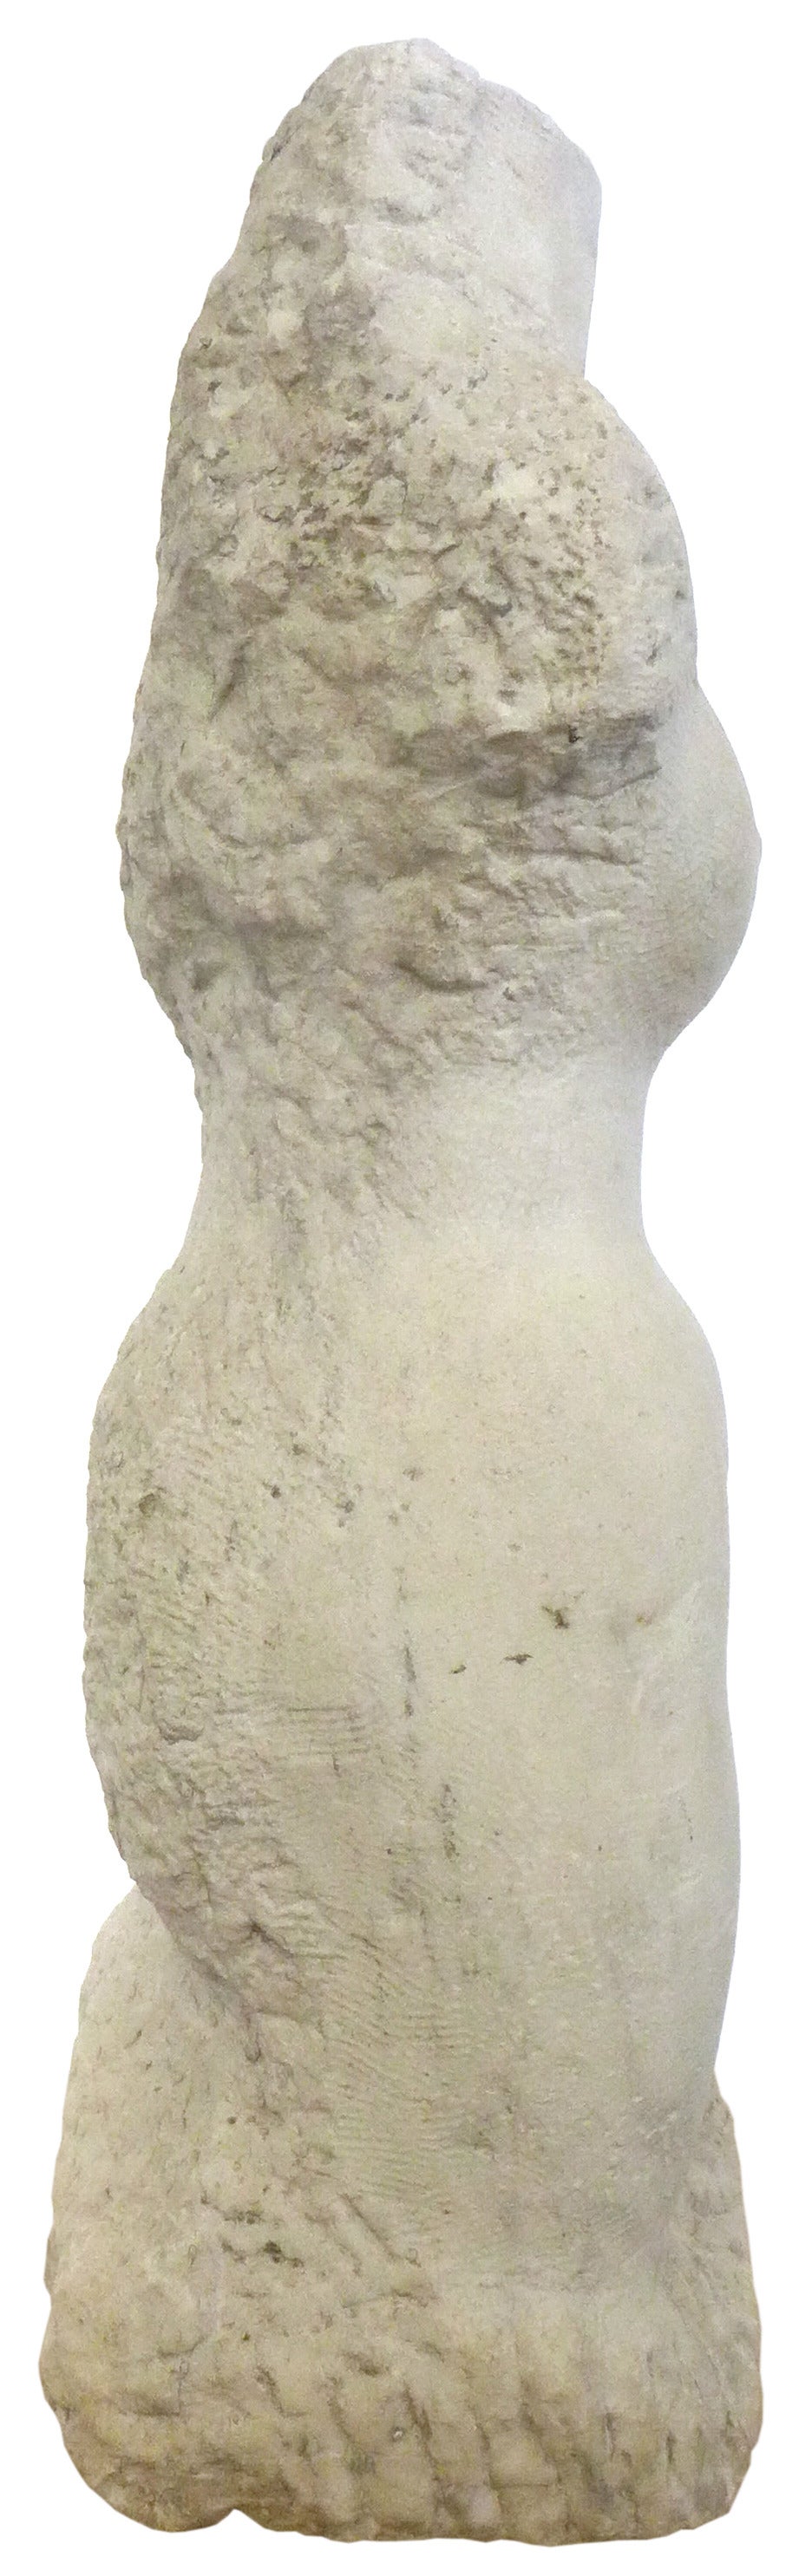 A fantastic and wonderfully executed hand-carved marble sculpture of a female torso. Featuring incredible finely detailed chisel-work, a simultaneously figural and stylized form; subtly and beautifully exaggerated. A strong representation of 1940s